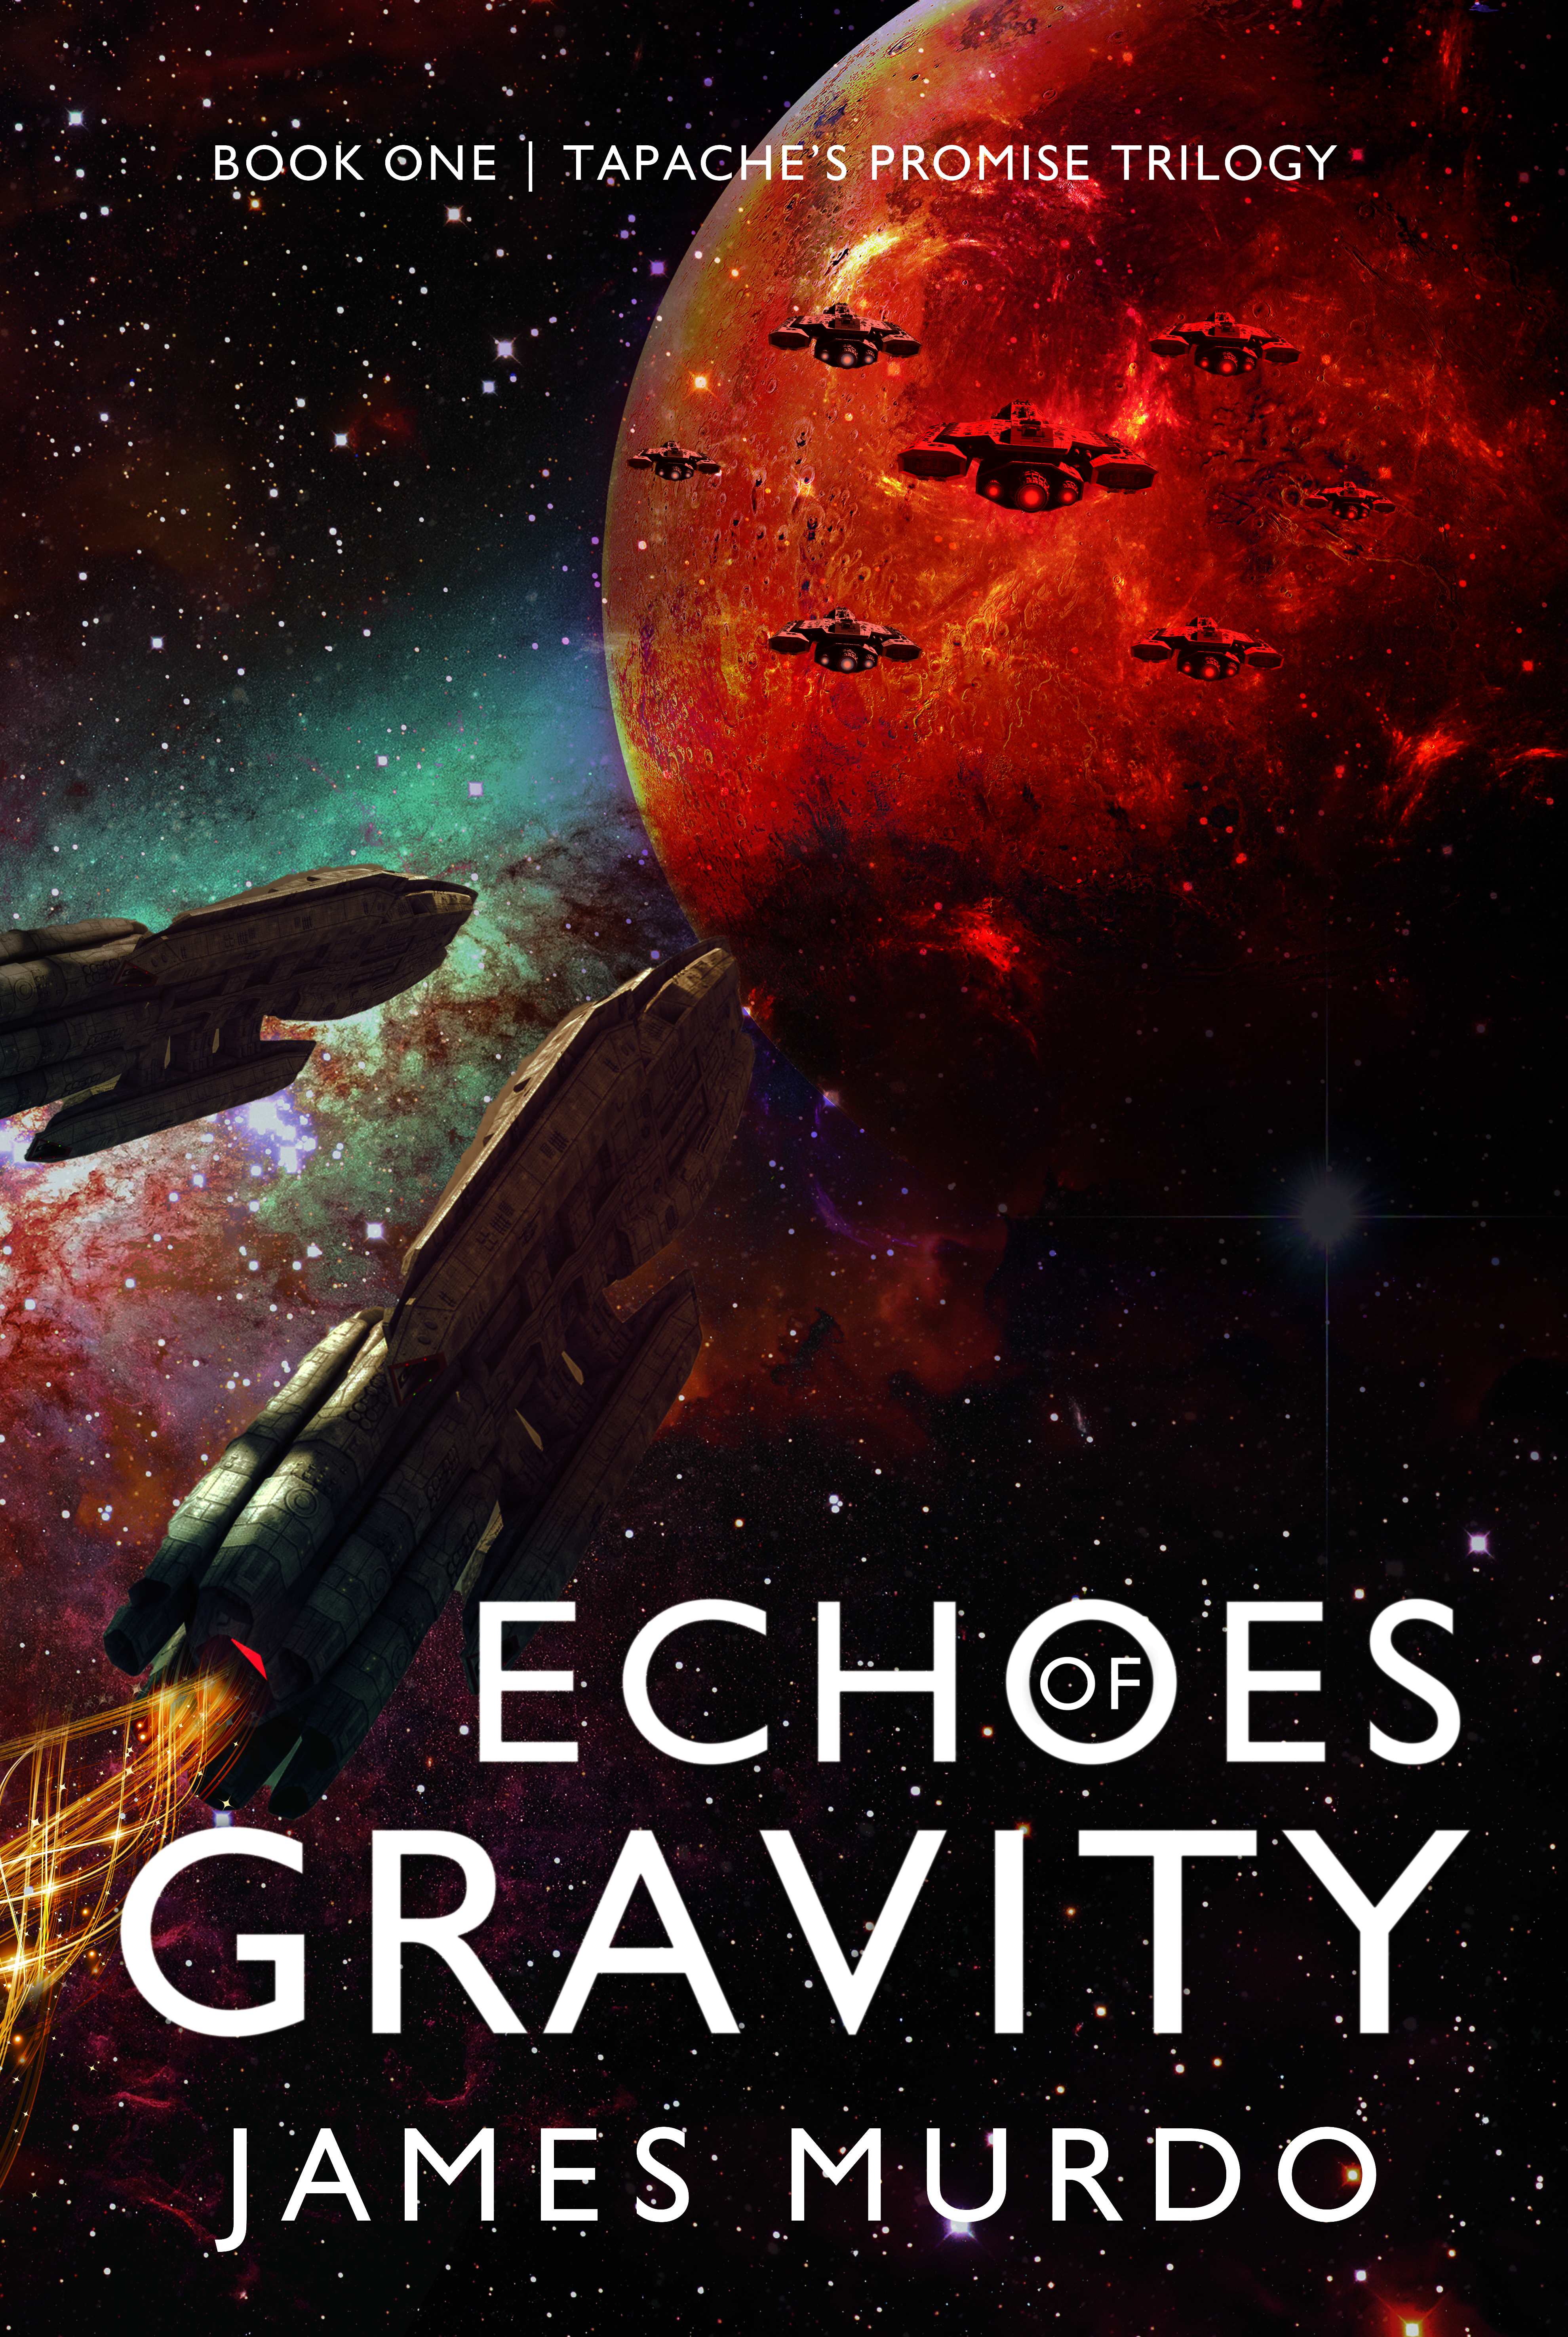 Echoes of Gravity:  James Murdo’s trilogy-starter grips readers with a clever mix of Star Trek, Altered Carbon and The Hunger Games